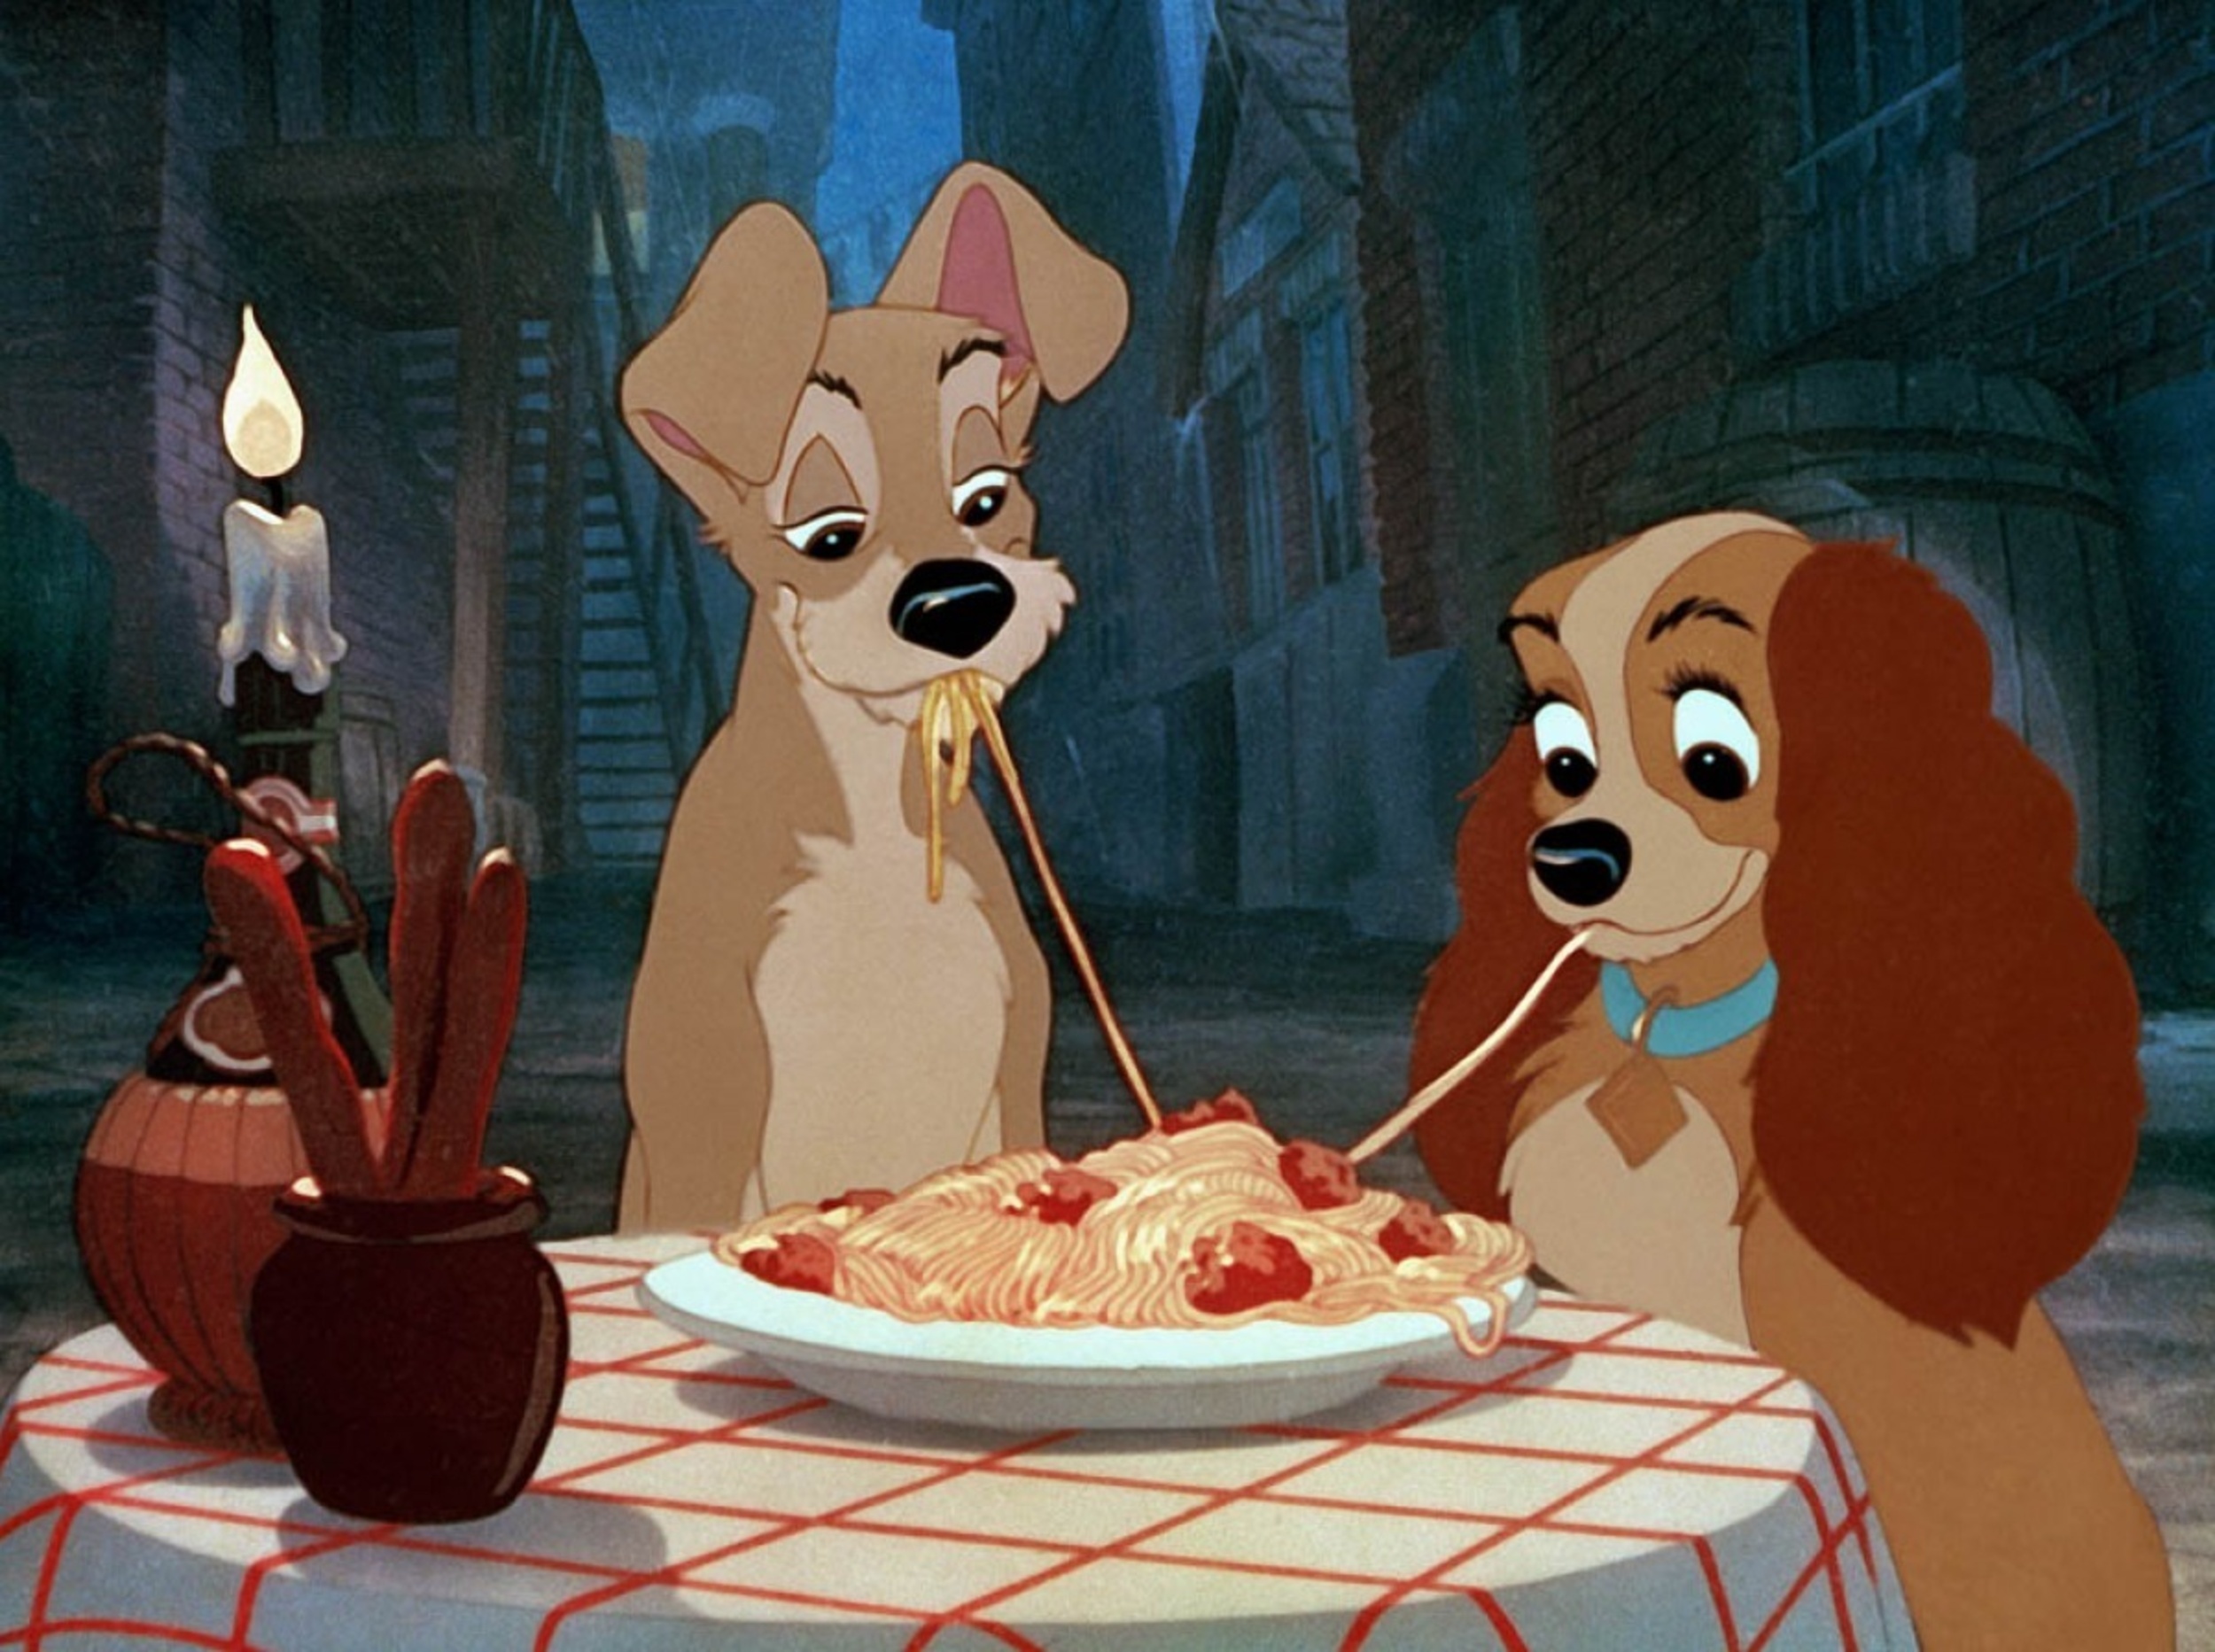 <p>The quintessential animated dog movie. “Lady and the Tramp” tells a classic tale of star-crossed lovers. They just happen to be dogs. At least they got to share a famous plate of pasta.</p><p><a href='https://www.msn.com/en-us/community/channel/vid-cj9pqbr0vn9in2b6ddcd8sfgpfq6x6utp44fssrv6mc2gtybw0us'>Follow us on MSN to see more of our exclusive entertainment content.</a></p>